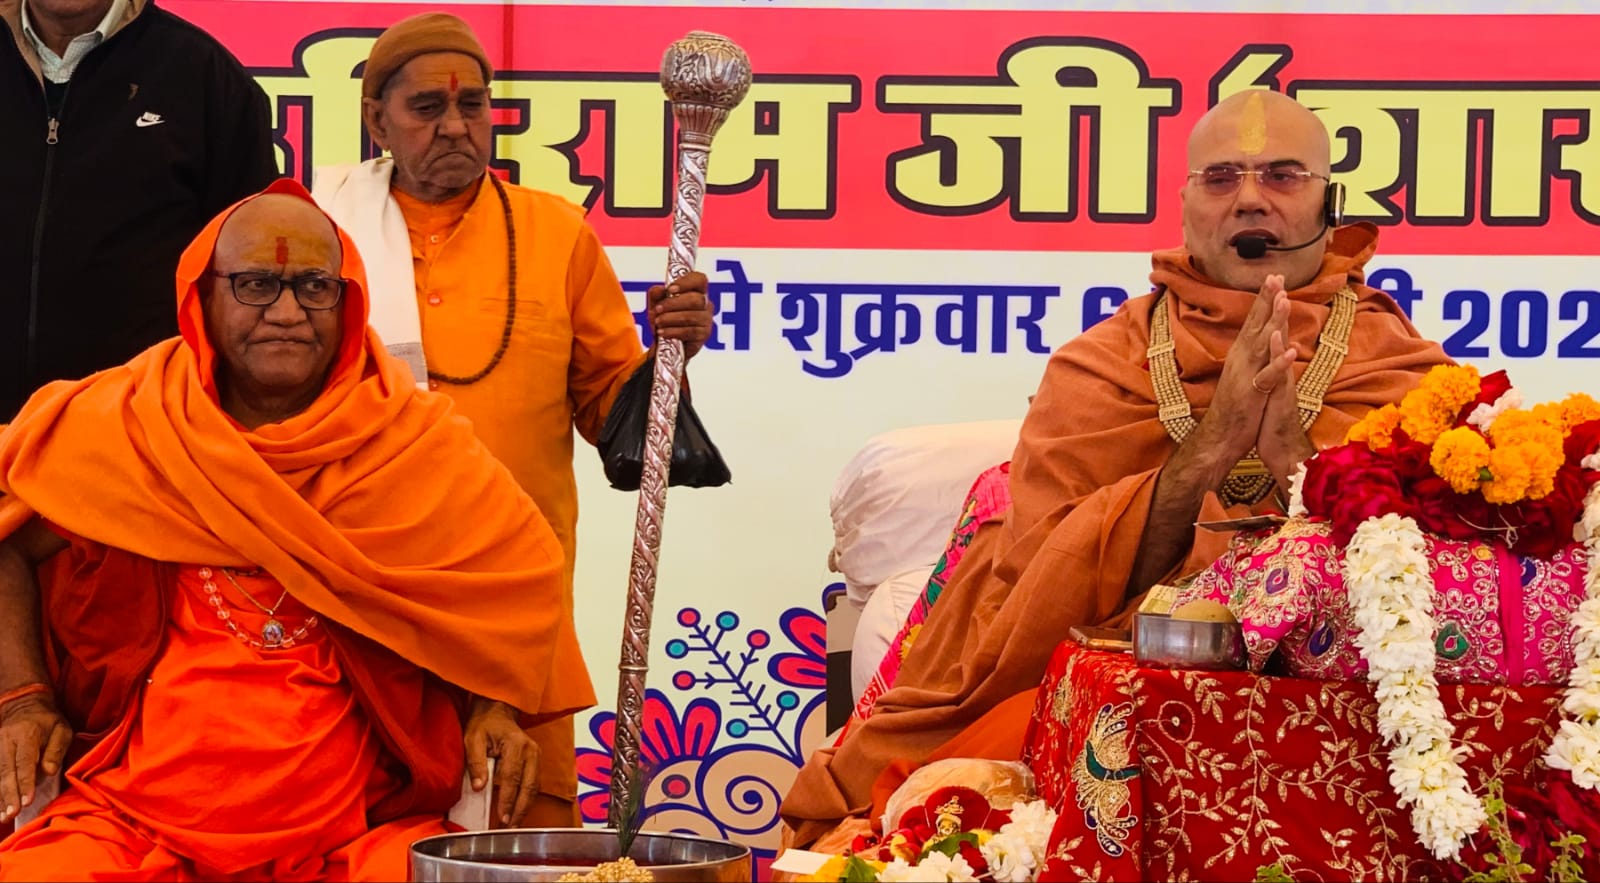 completion-of-seven-days-bhagwat-katha